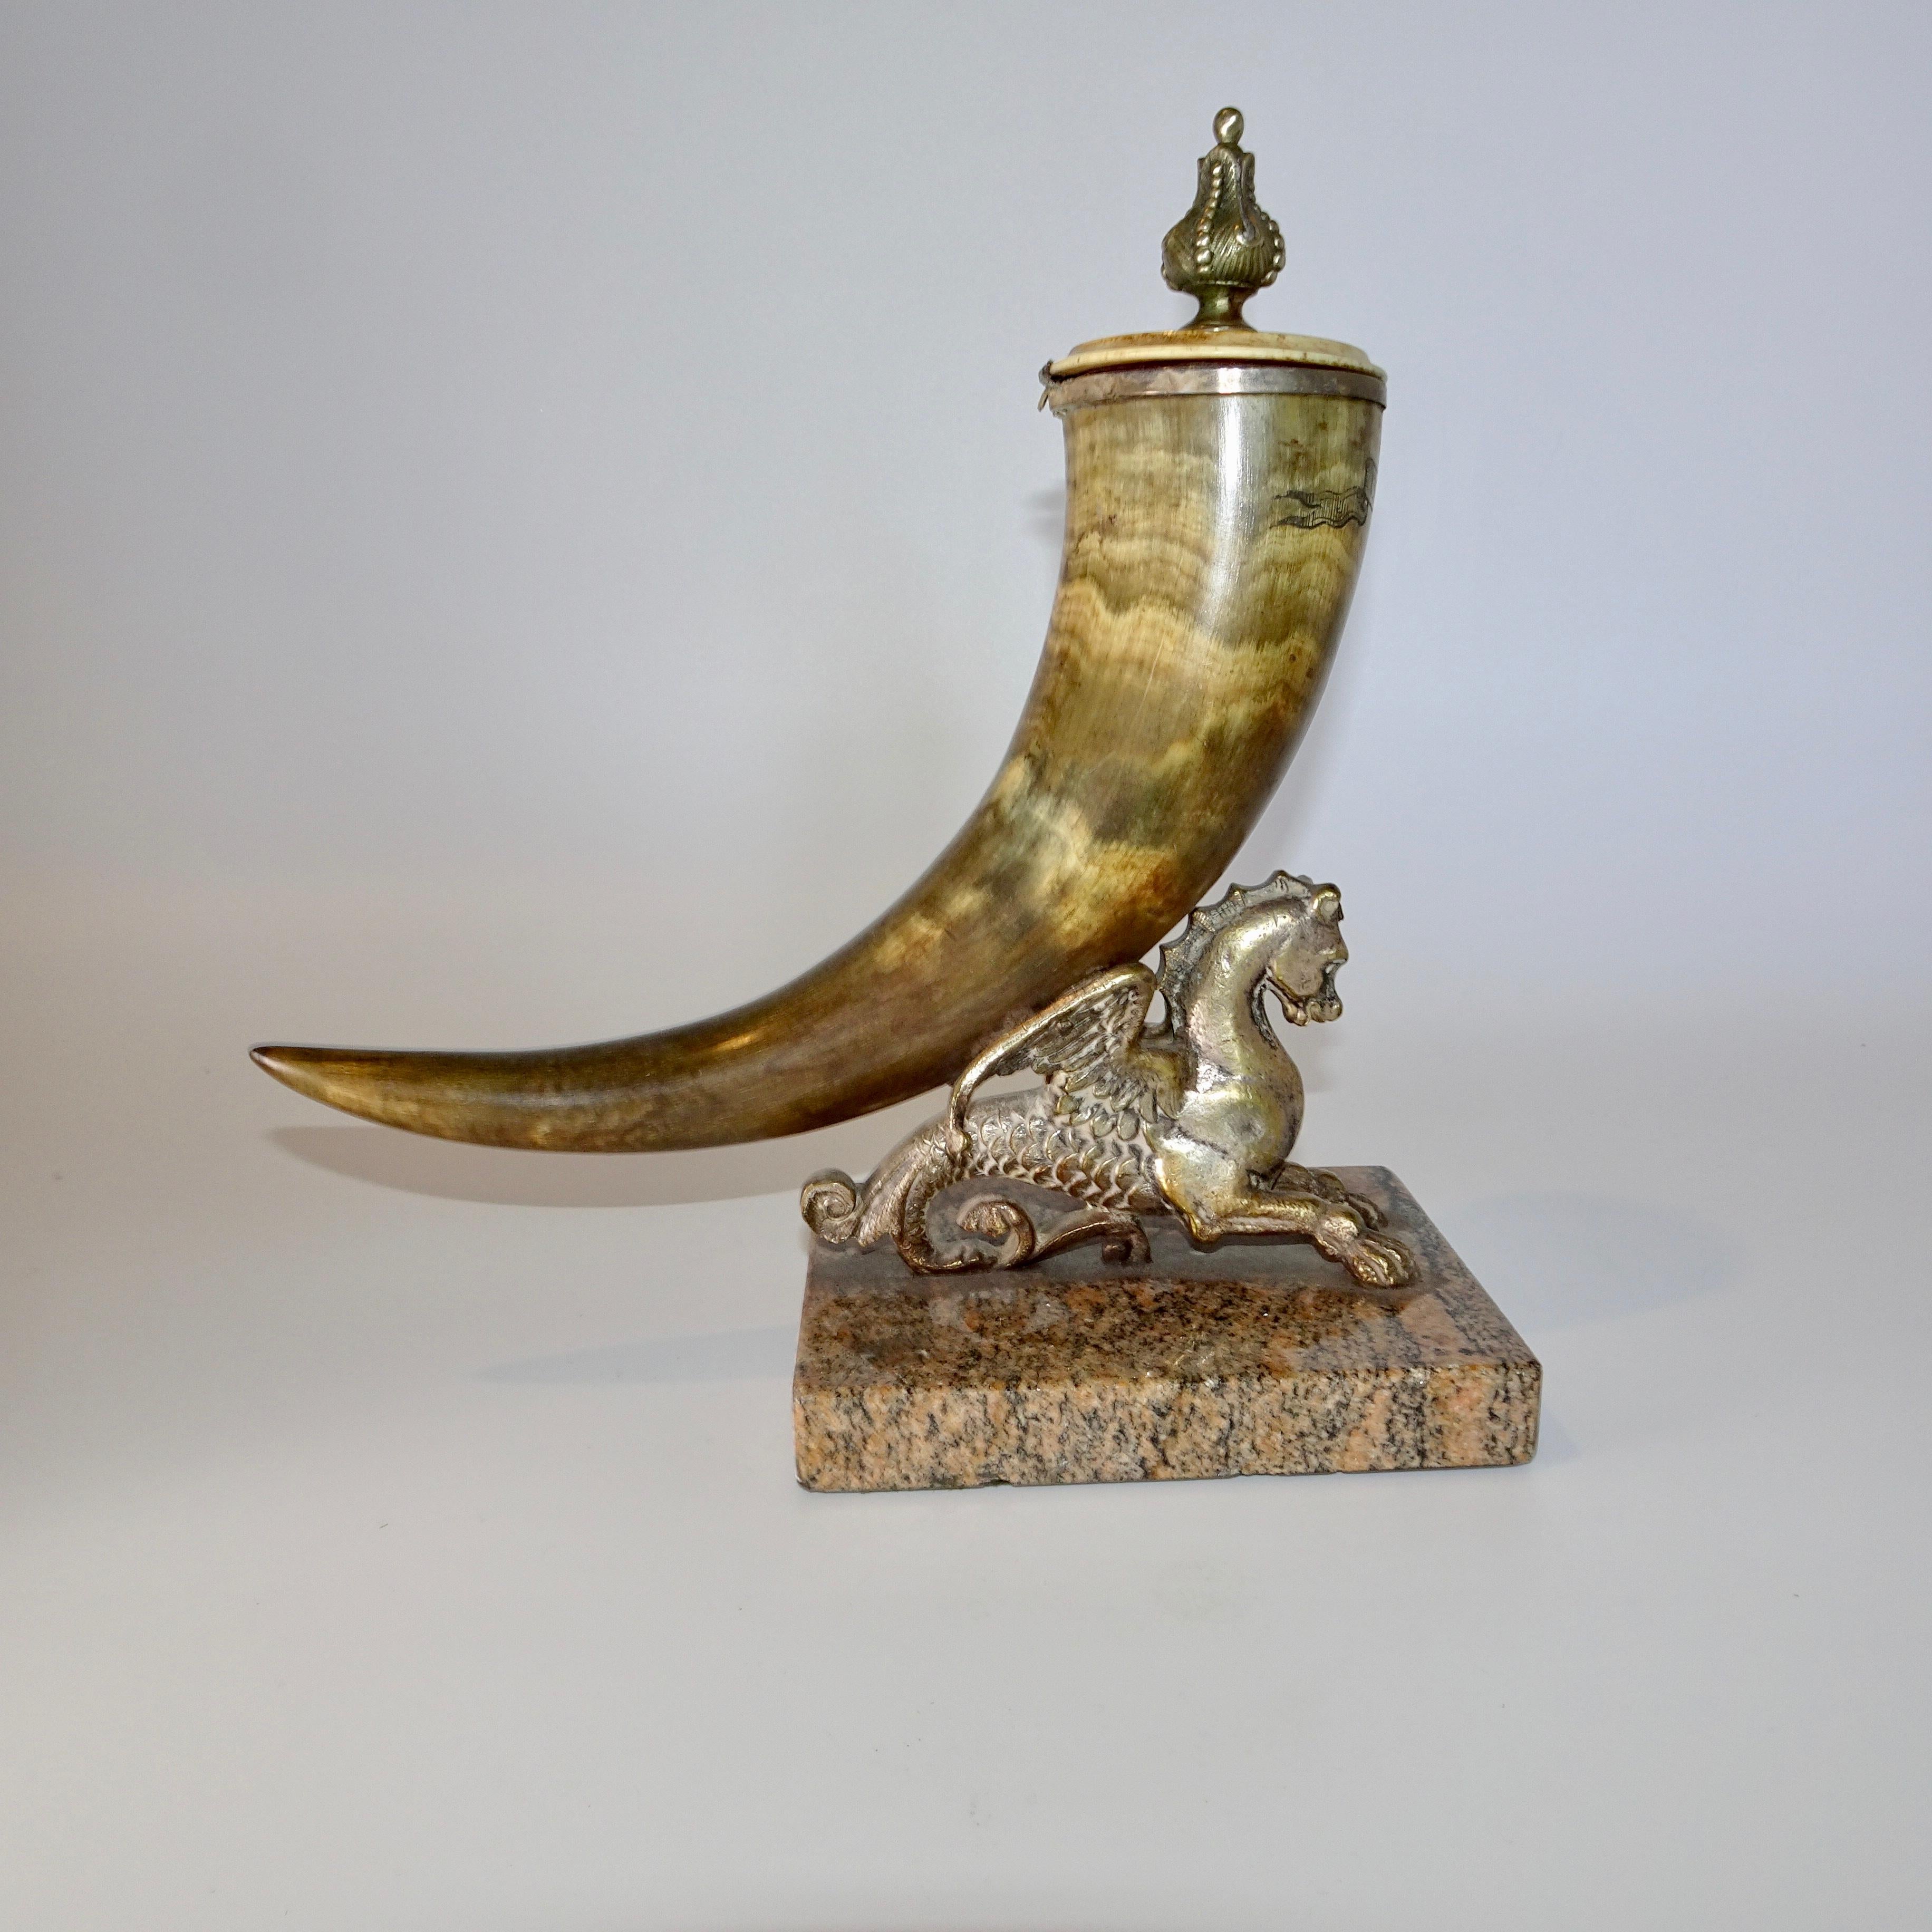 19th century horn and silver quill holder with unicorn figure on marble base.